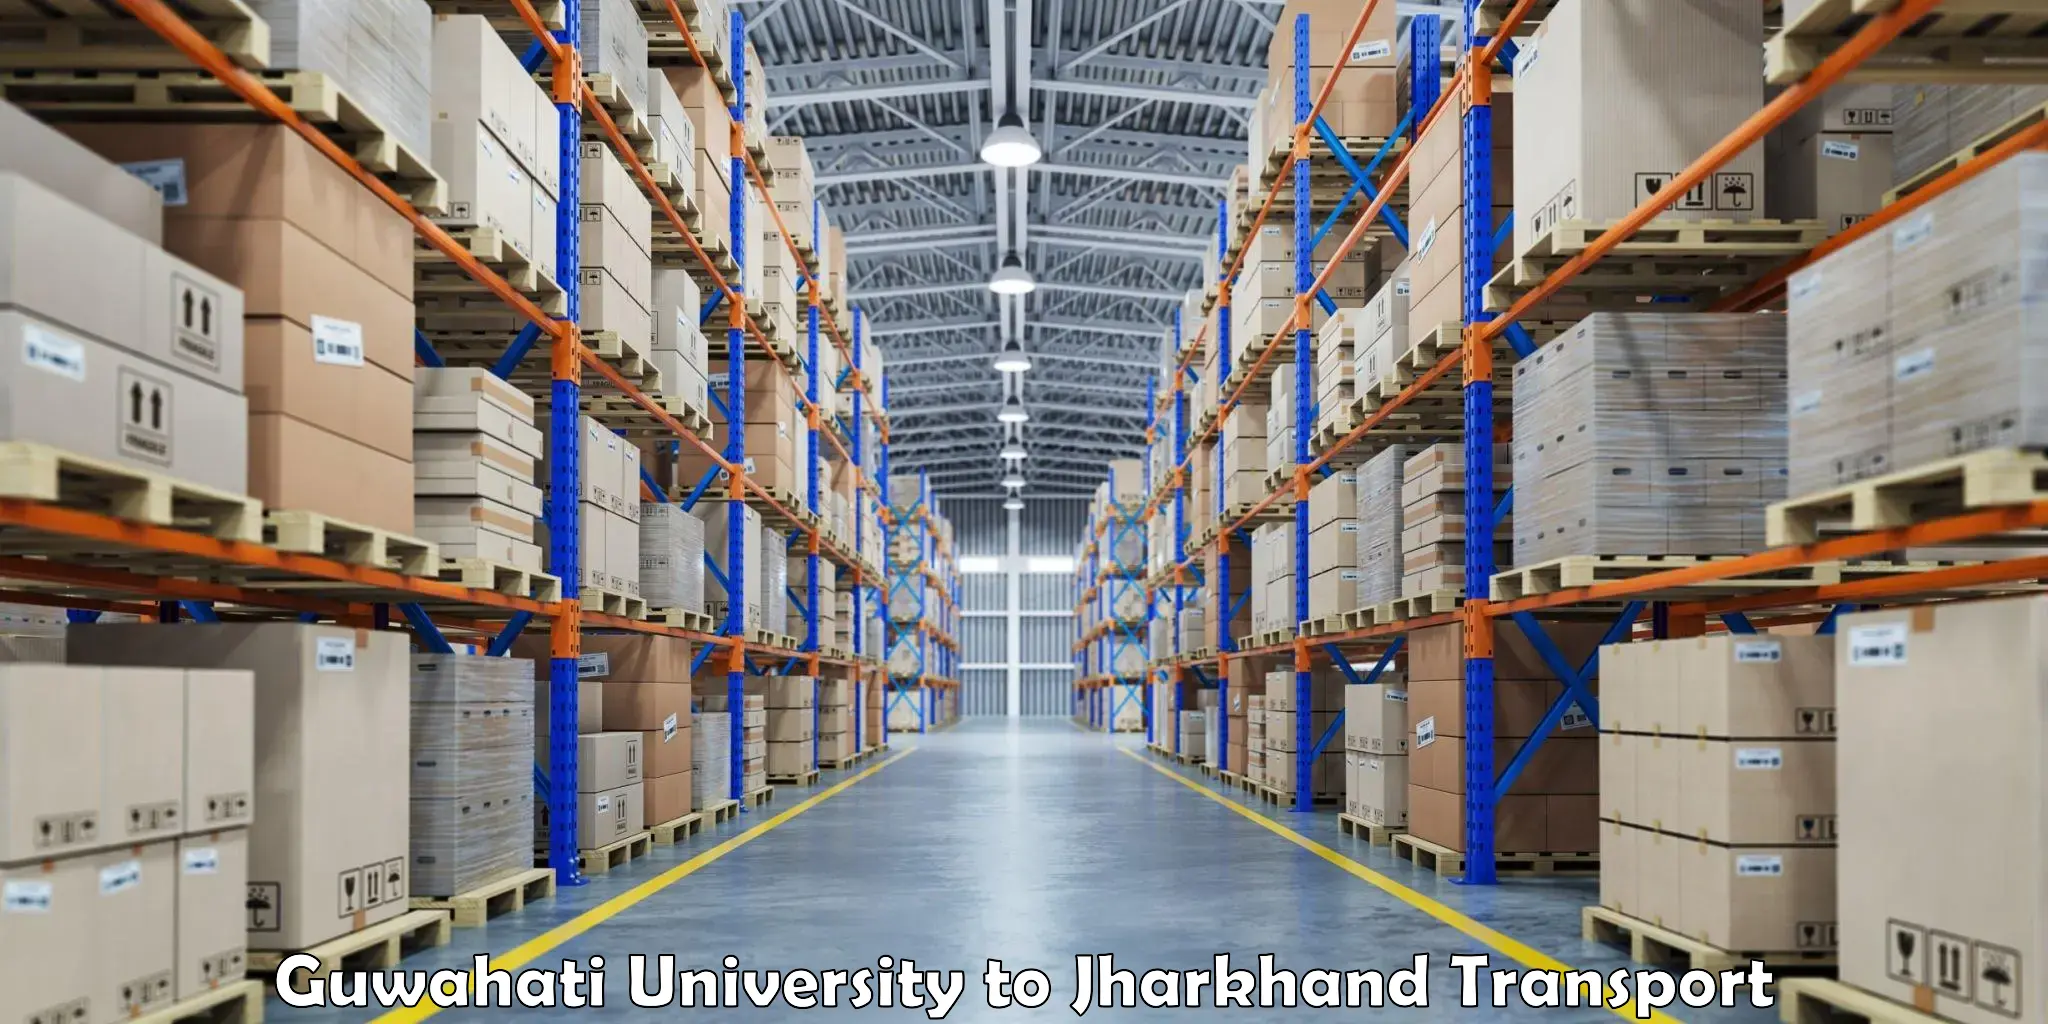 Road transport services in Guwahati University to Latehar